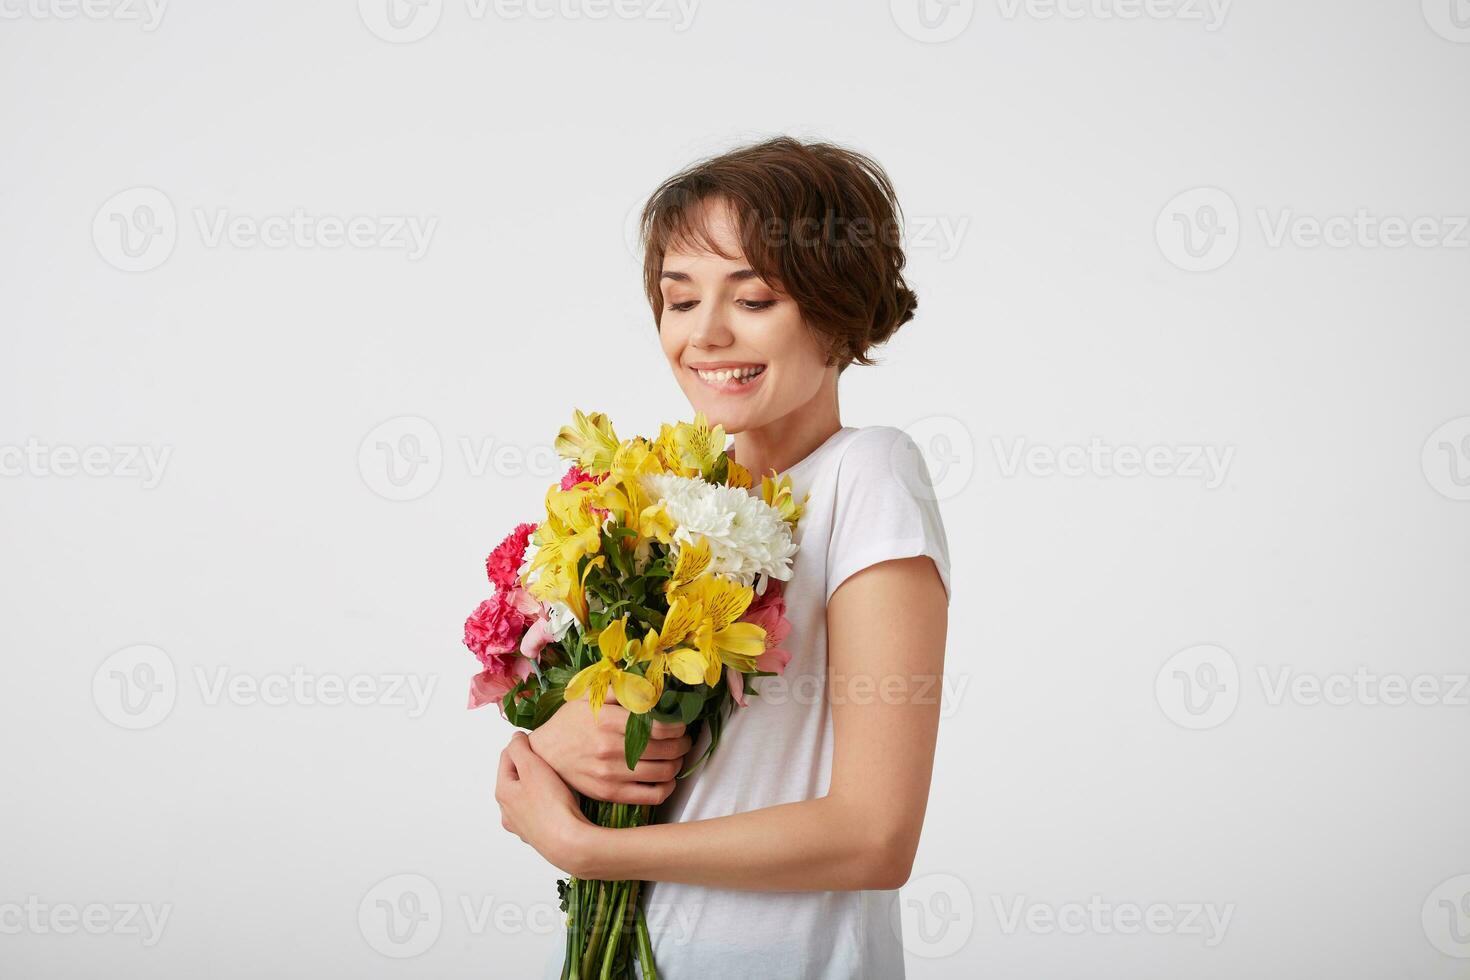 Cute happy young short haired girl in white blank t-shirt, holding a bouquet, bites his lip and looks at the of colorful flowers, enjoying the smell, standing over white background. photo